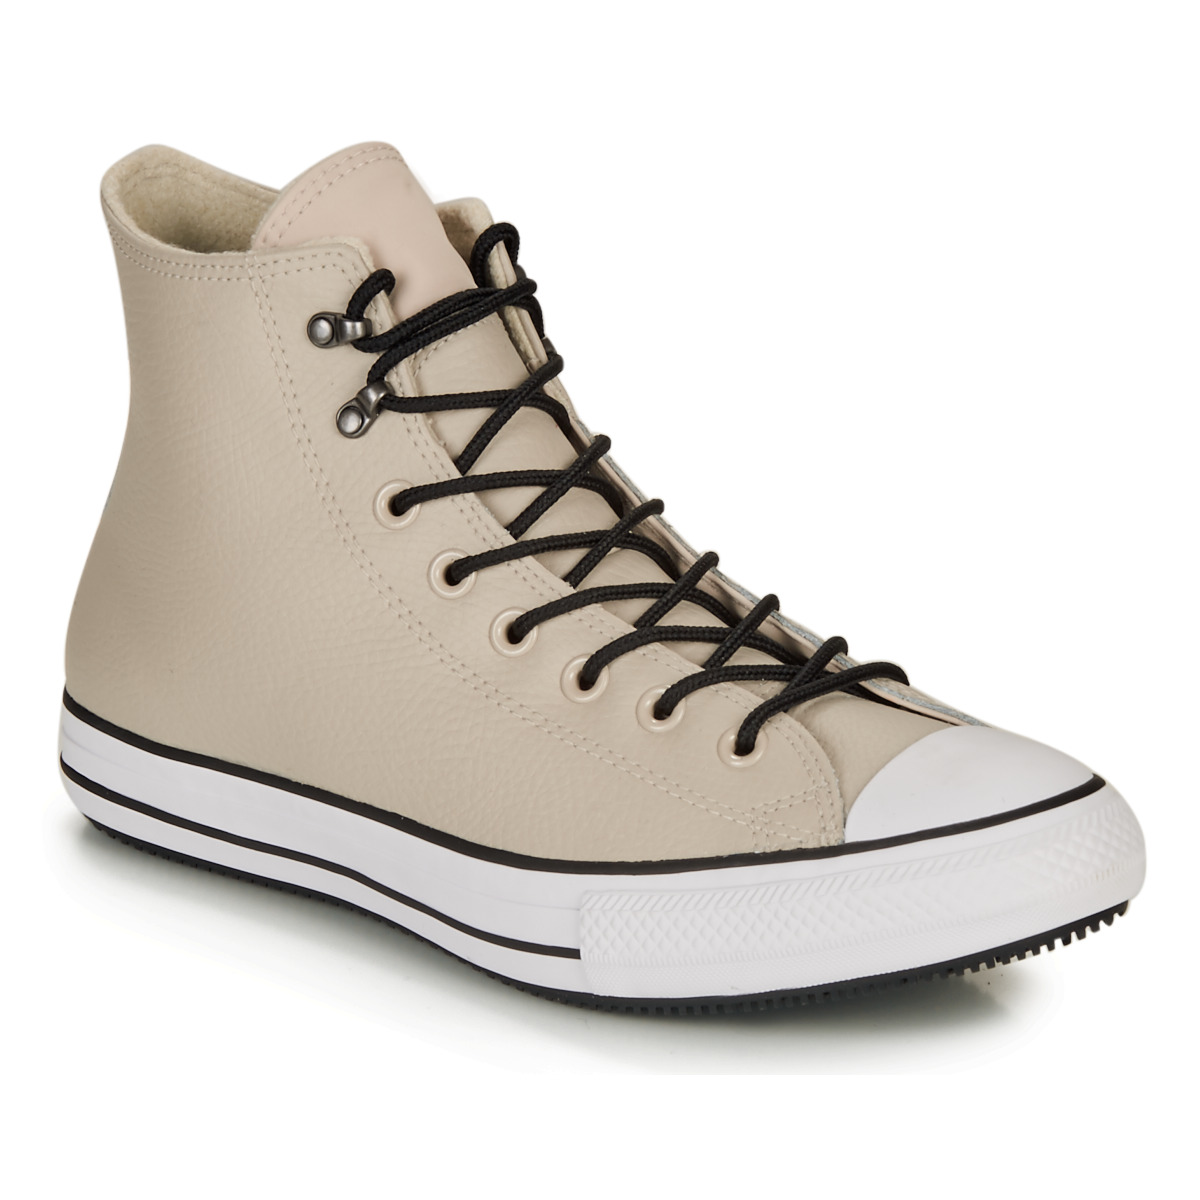 Converse Chuck Taylor All Star Winter Leather Boot Hi Beige